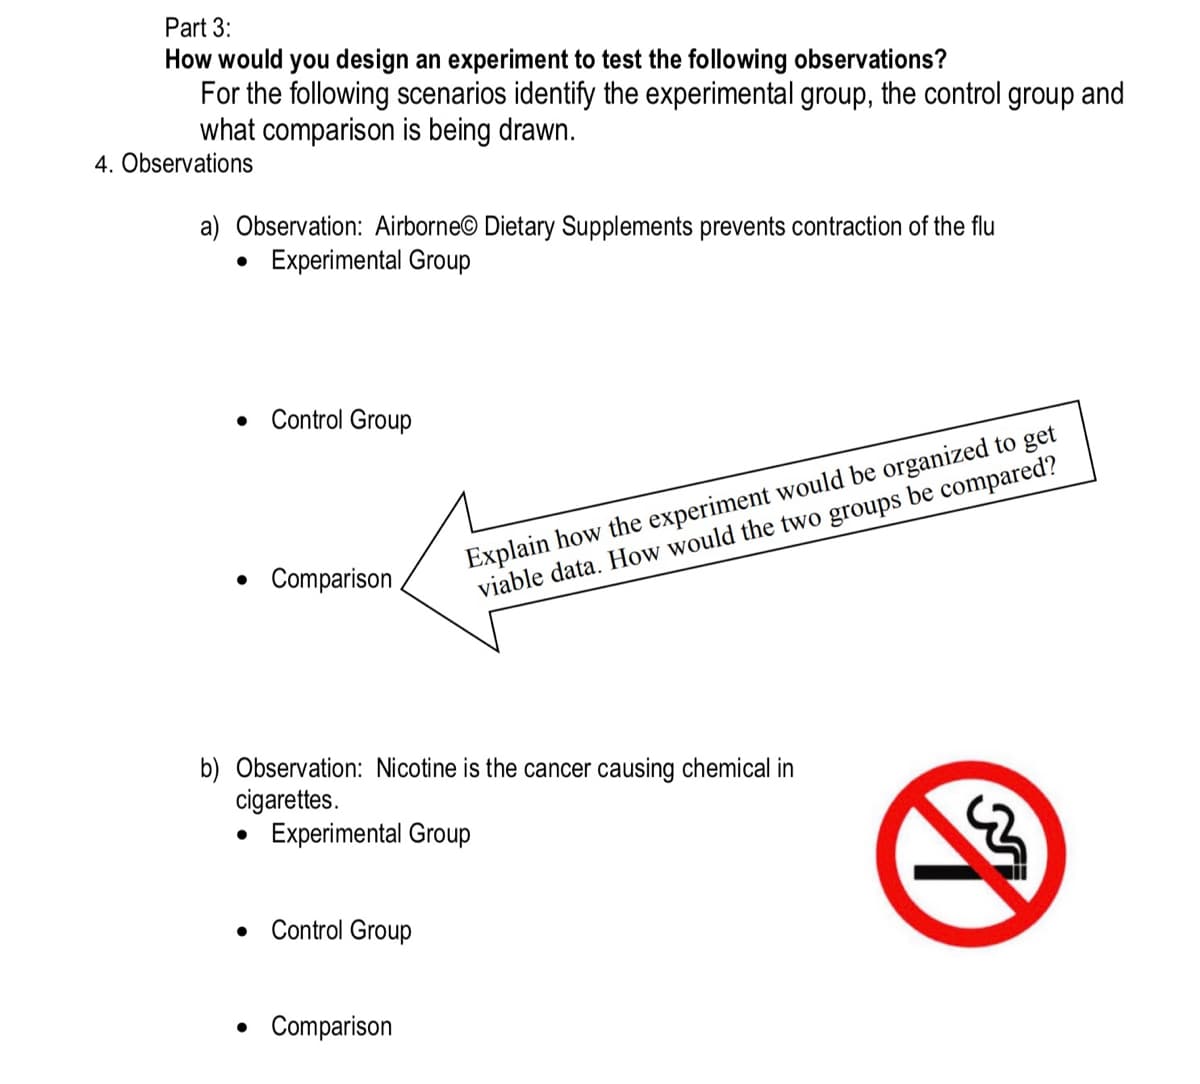 Part 3:
How would you design an experiment to test the following observations?
For the following scenarios identify the experimental group, the control group and
what comparison is being drawn.
4. Observations
a) Observation: Airborne Dietary Supplements prevents contraction of the flu
Experimental Group
●
●
Control Group
● Comparison
b) Observation: Nicotine is the cancer causing chemical in
cigarettes.
• Experimental Group
• Control Group
Explain how the experiment would be organized to get
viable data. How would the two groups be compared?
• Comparison
g